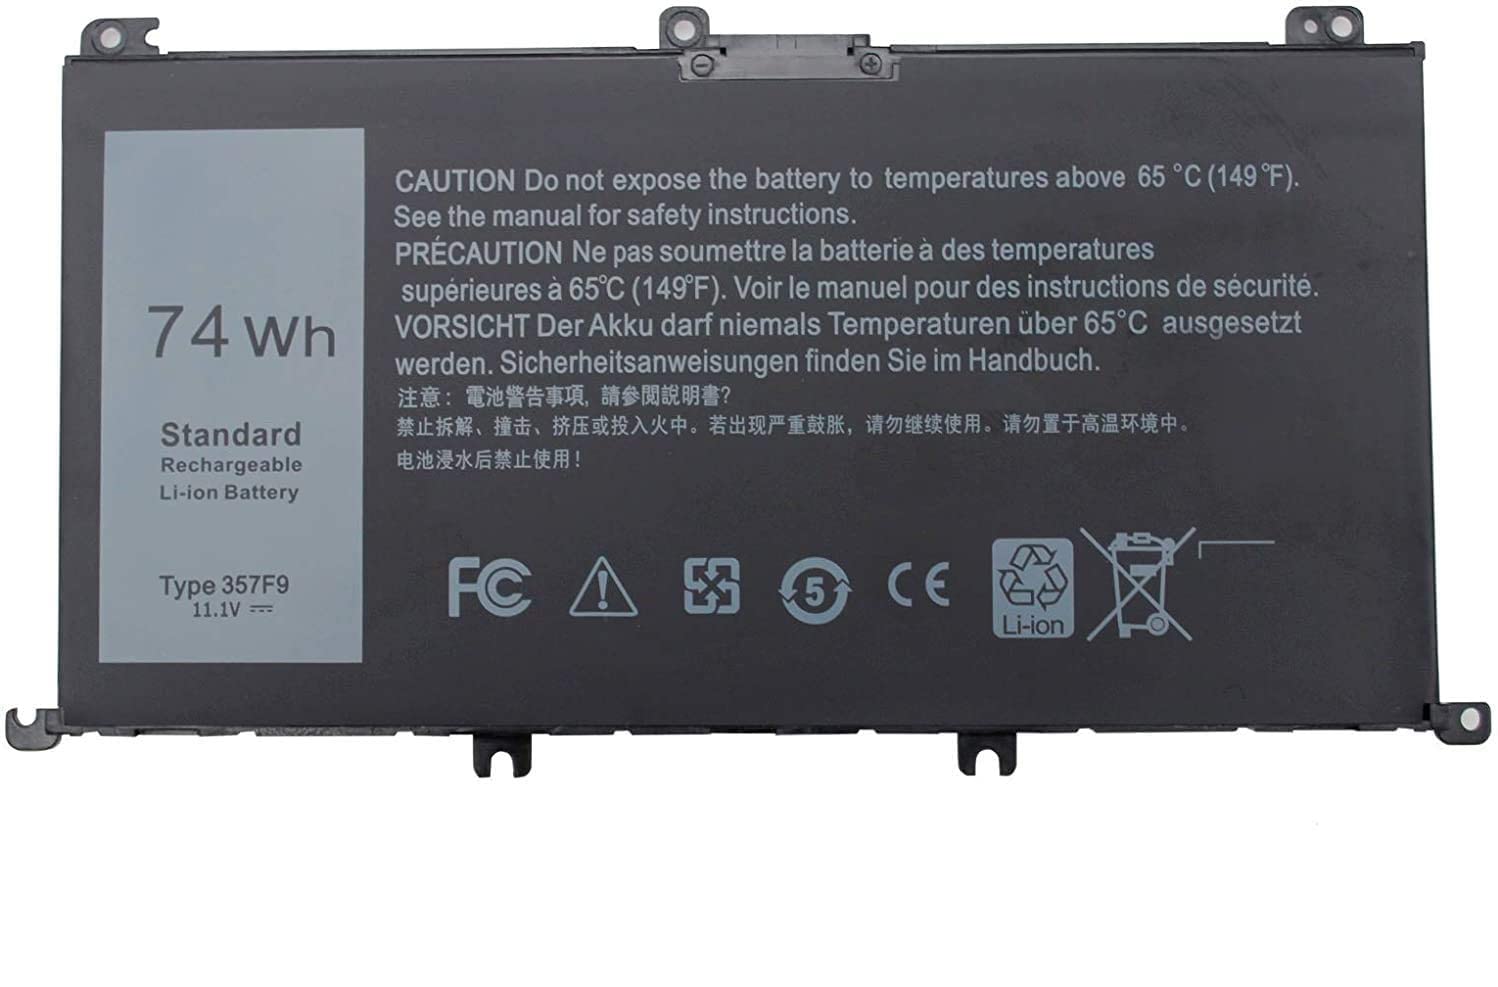 74Wh 50Wh 357F9 71JF4 Battery Dell Inspiron 15 7000 7559 7557 7567 7566 7759 15 5576 5577 INS15PD Series 15-7559 0GFJ6 P57F 071JF4 0357F9 6 Cell 11.1V 11.4V Li-ion Laptop Battery